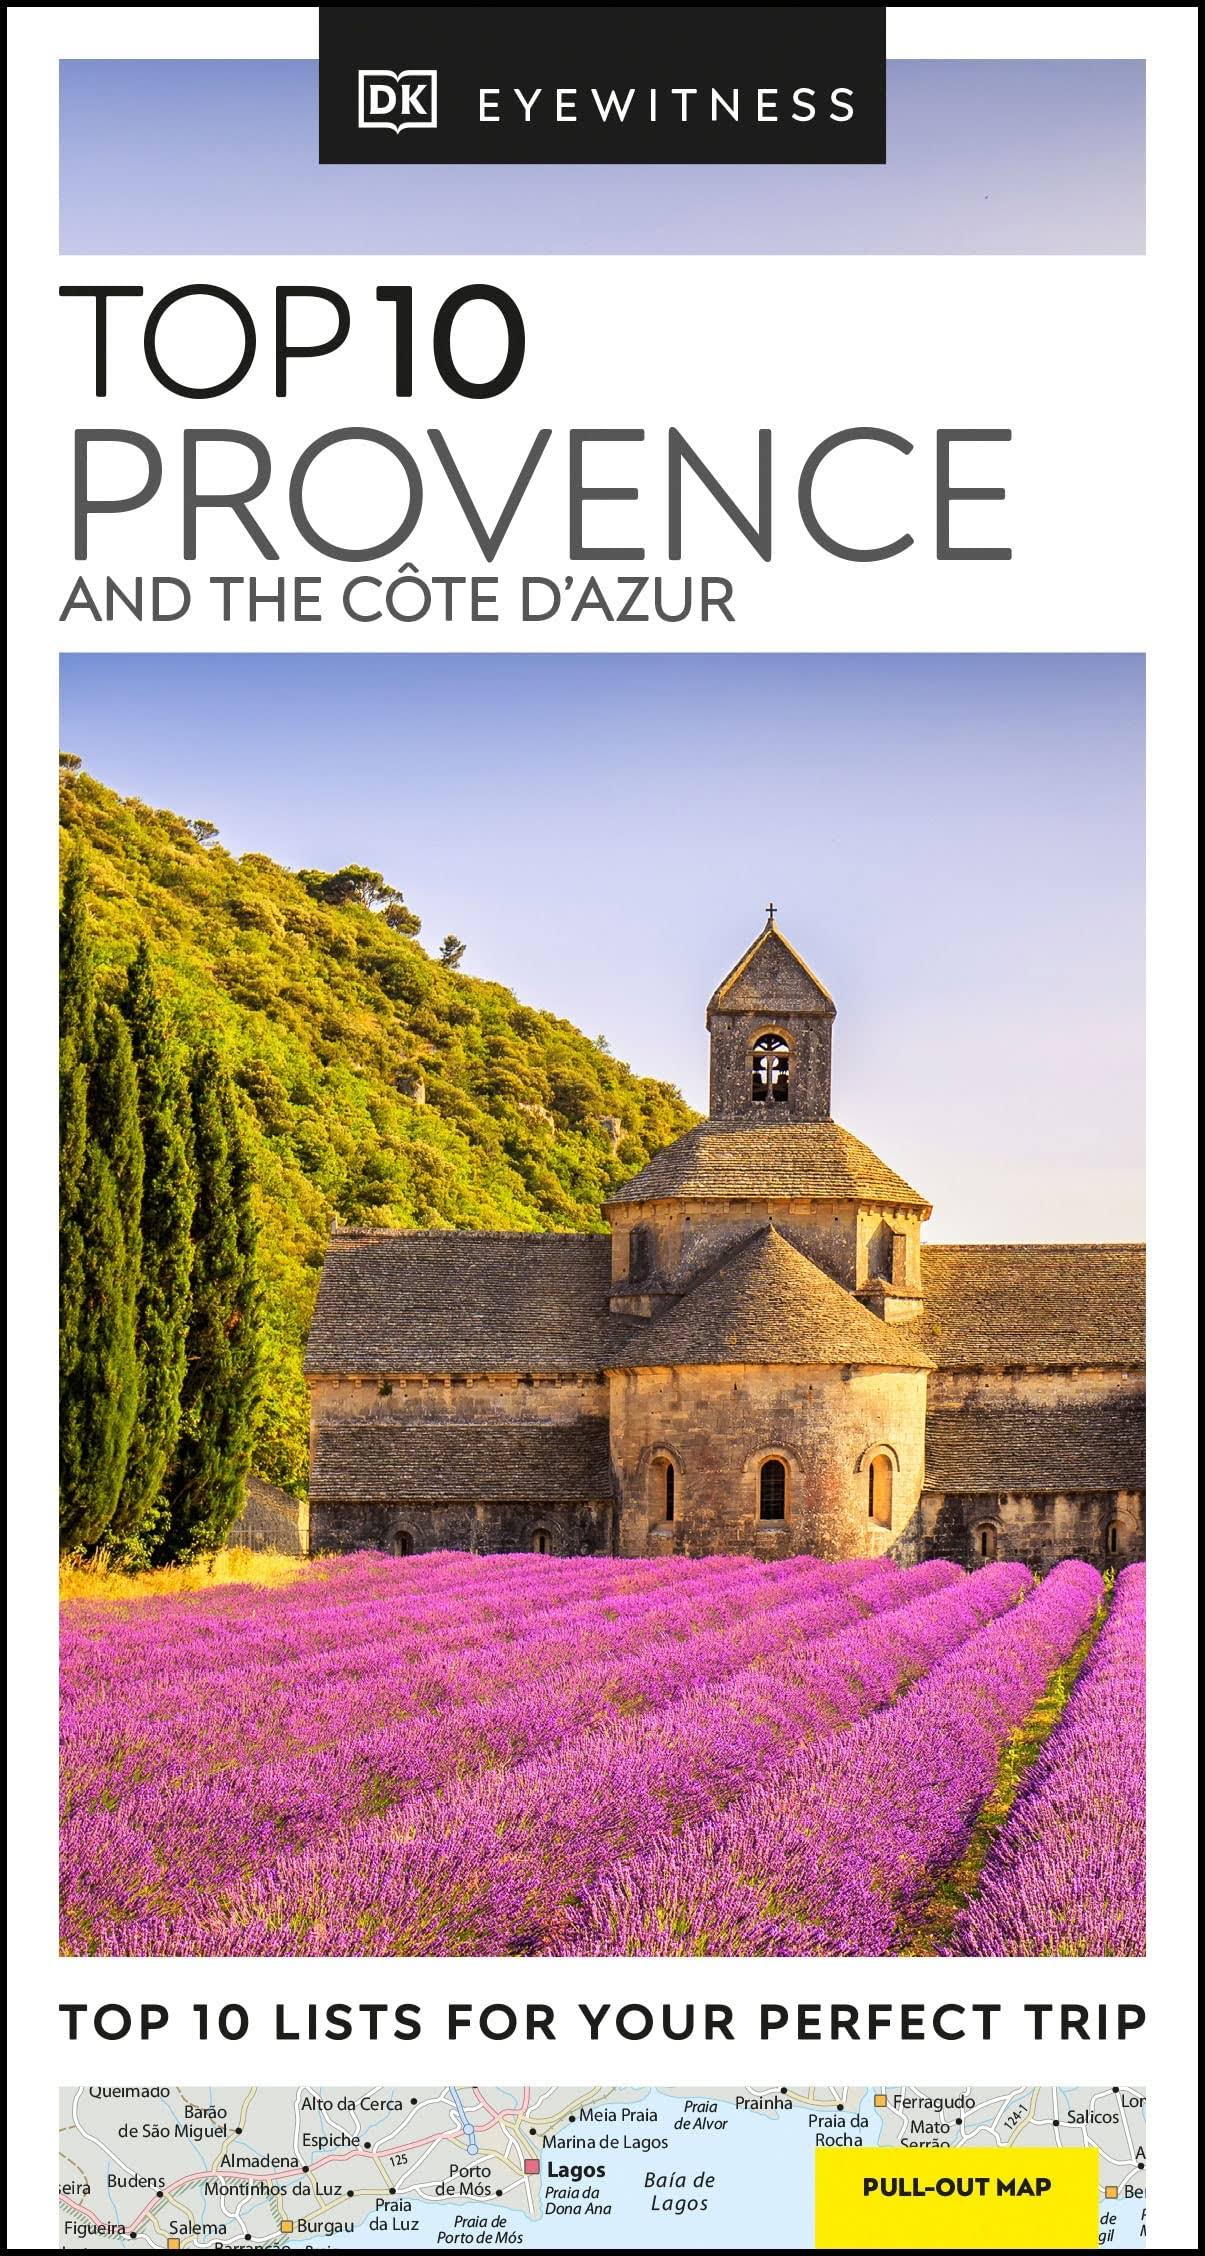 DK Eyewitness Top 10 Provence and the Côte D'Azur [Book]